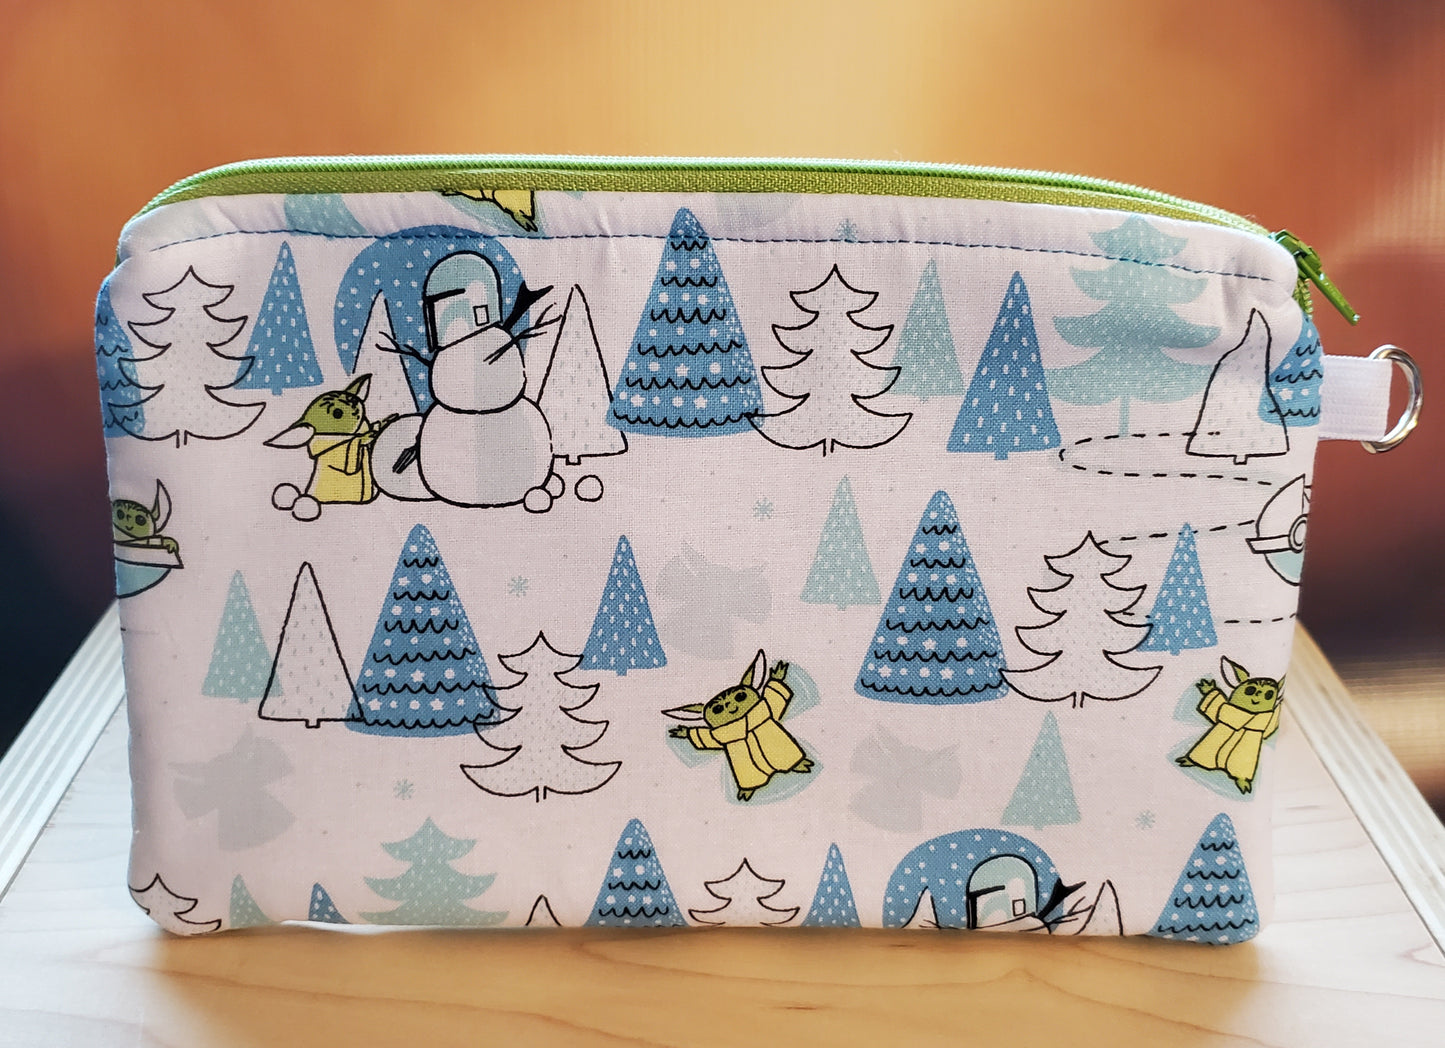 Wintery Baby Green Alien Zipper Bag - perfect for makeup, glasses, snacks and more!